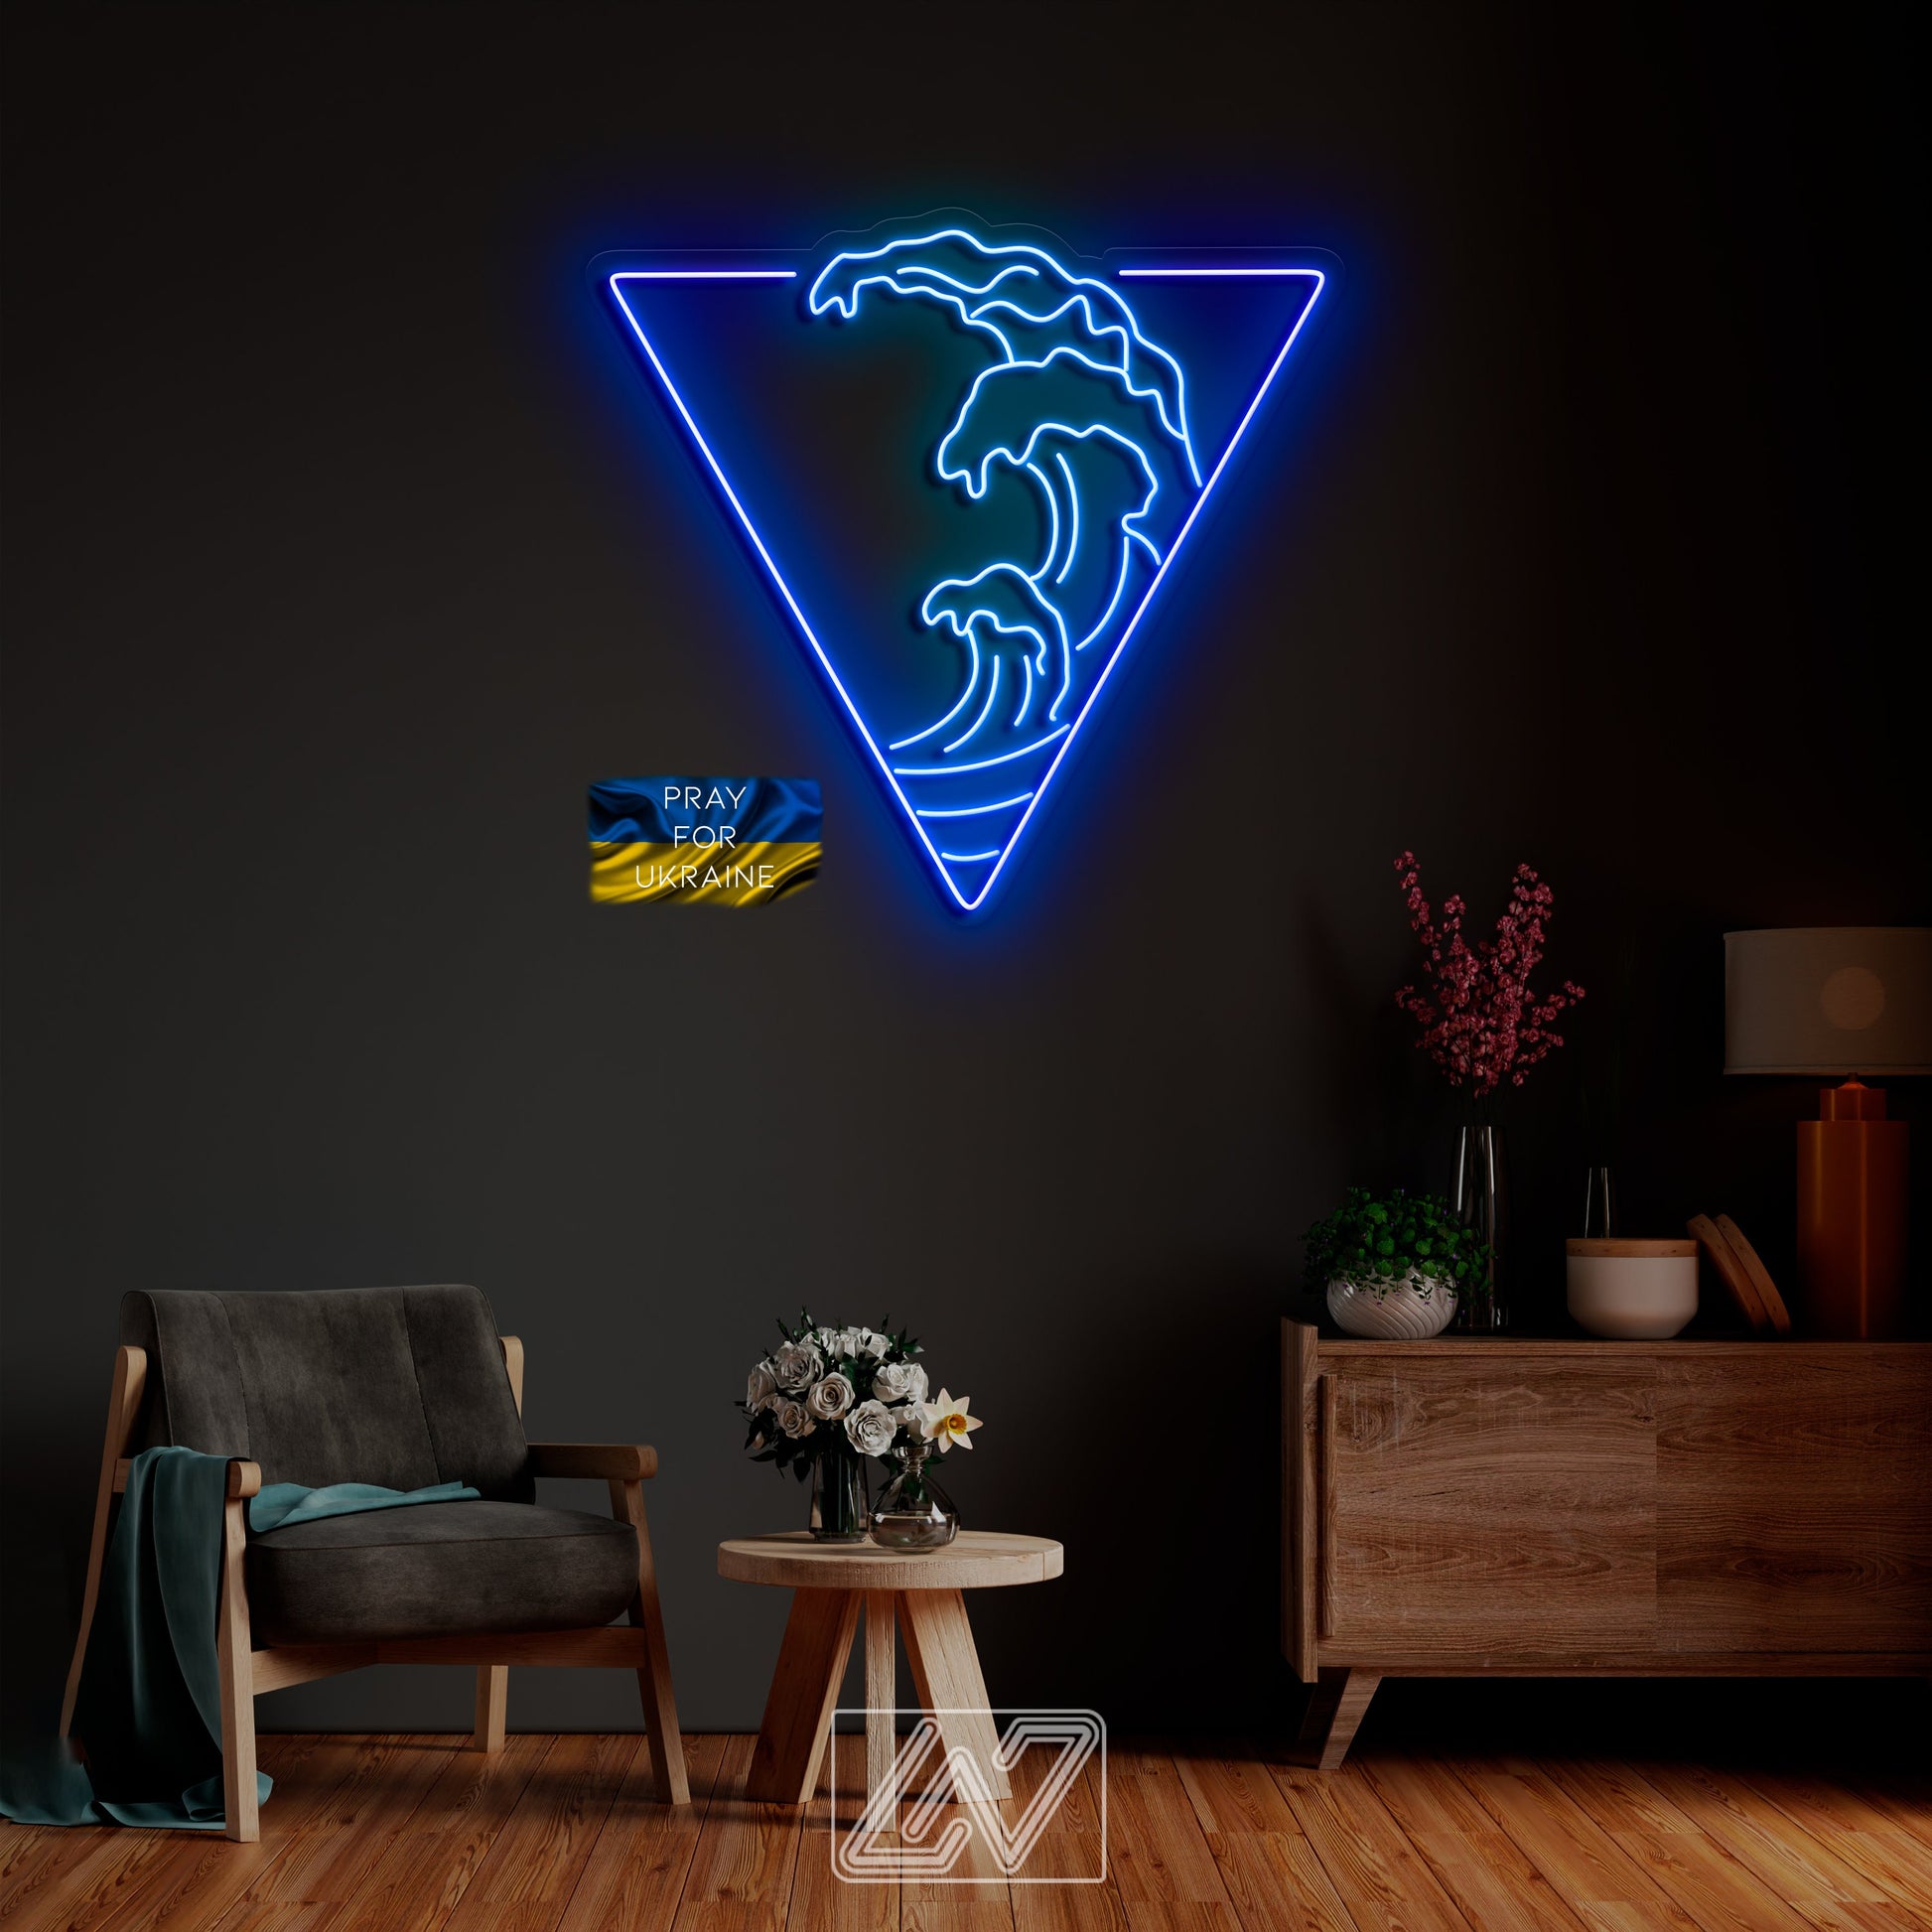 Sea Waves in a Triangle - LED Neon Sign - sea - custom neon sign - gift - wall decor - game room - sign wall art